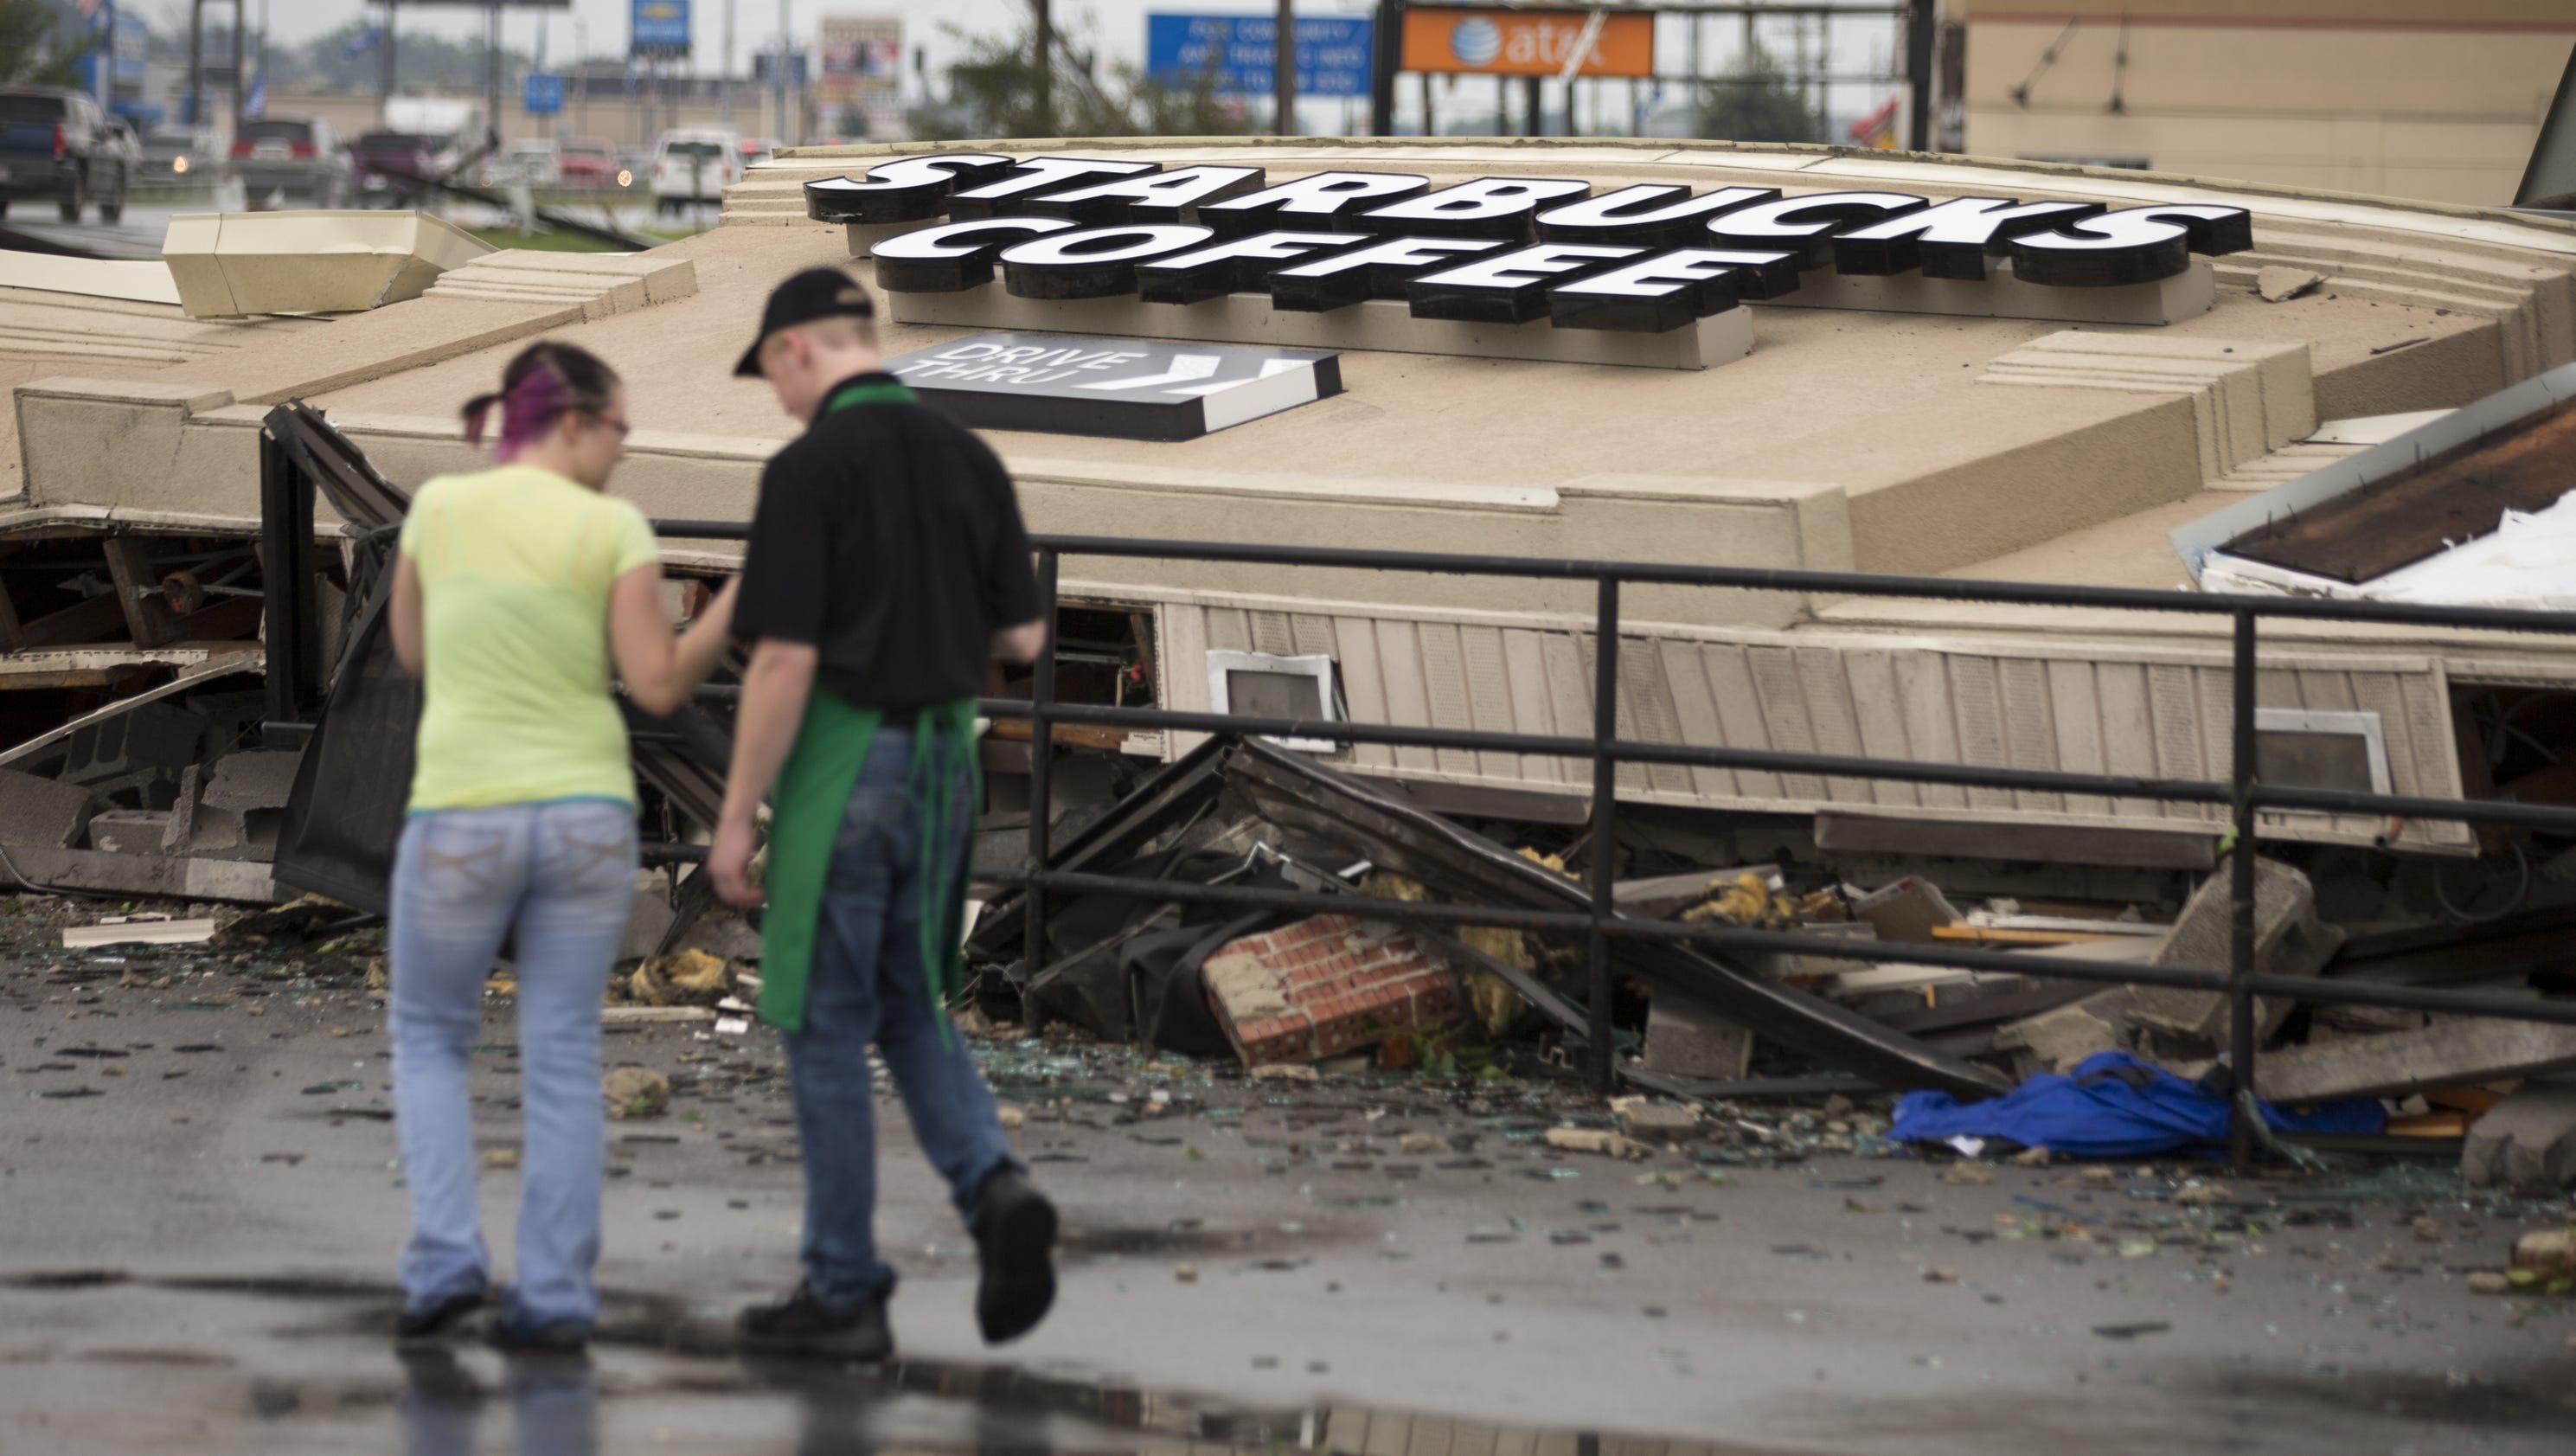 Storm blog Multiple tornadoes reported in Central Indiana